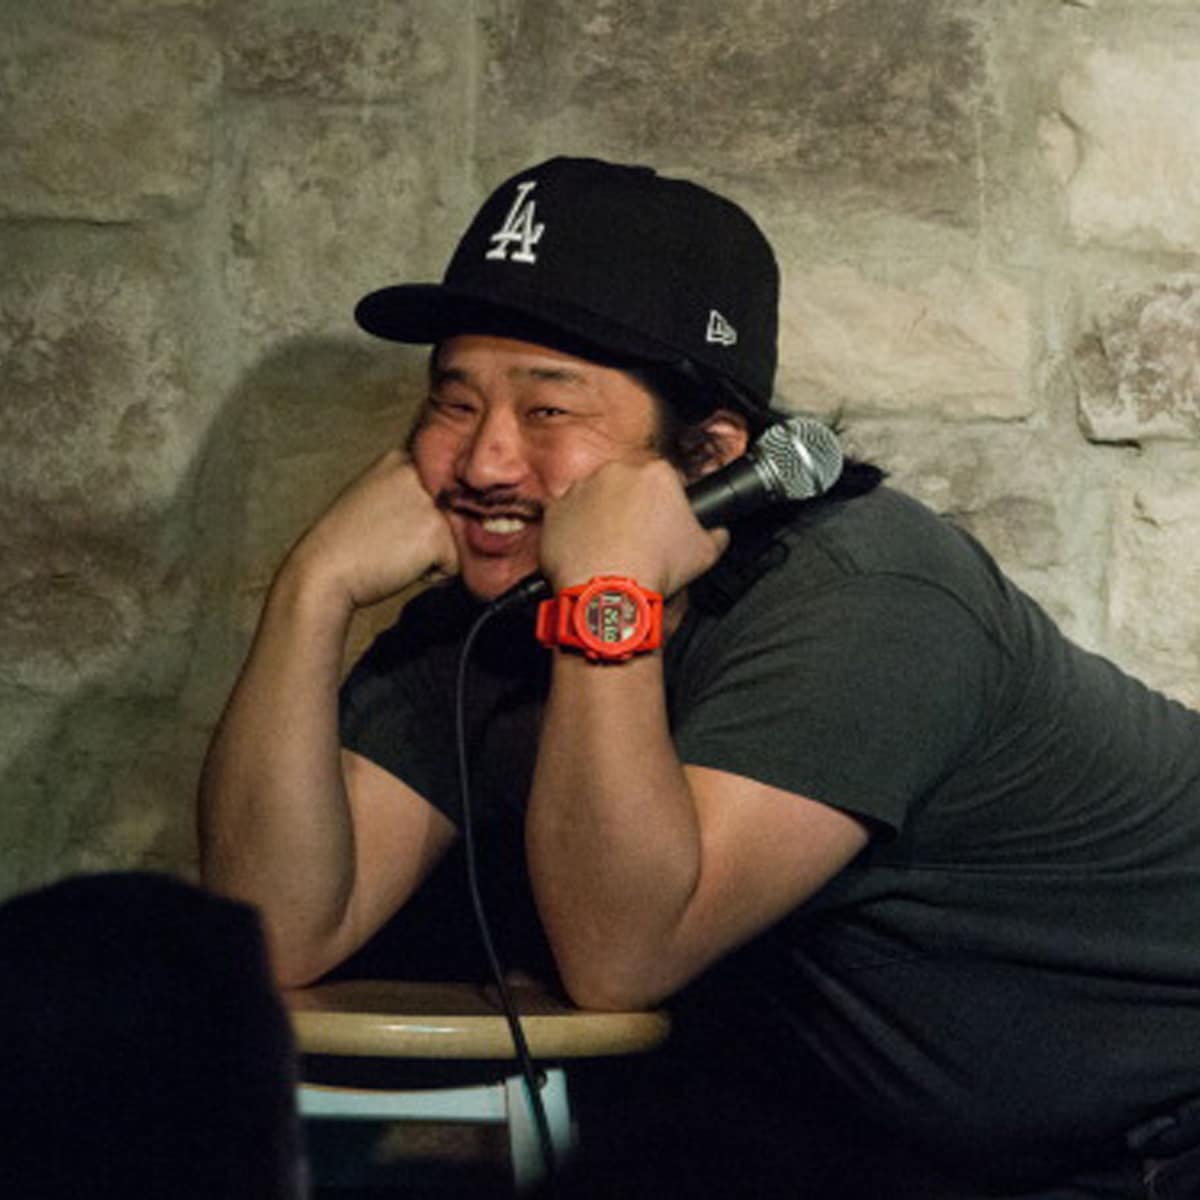 Bobby Lee performs at Yuk Yuk's Vancouver for the 2014 Northwest Comedy Fest